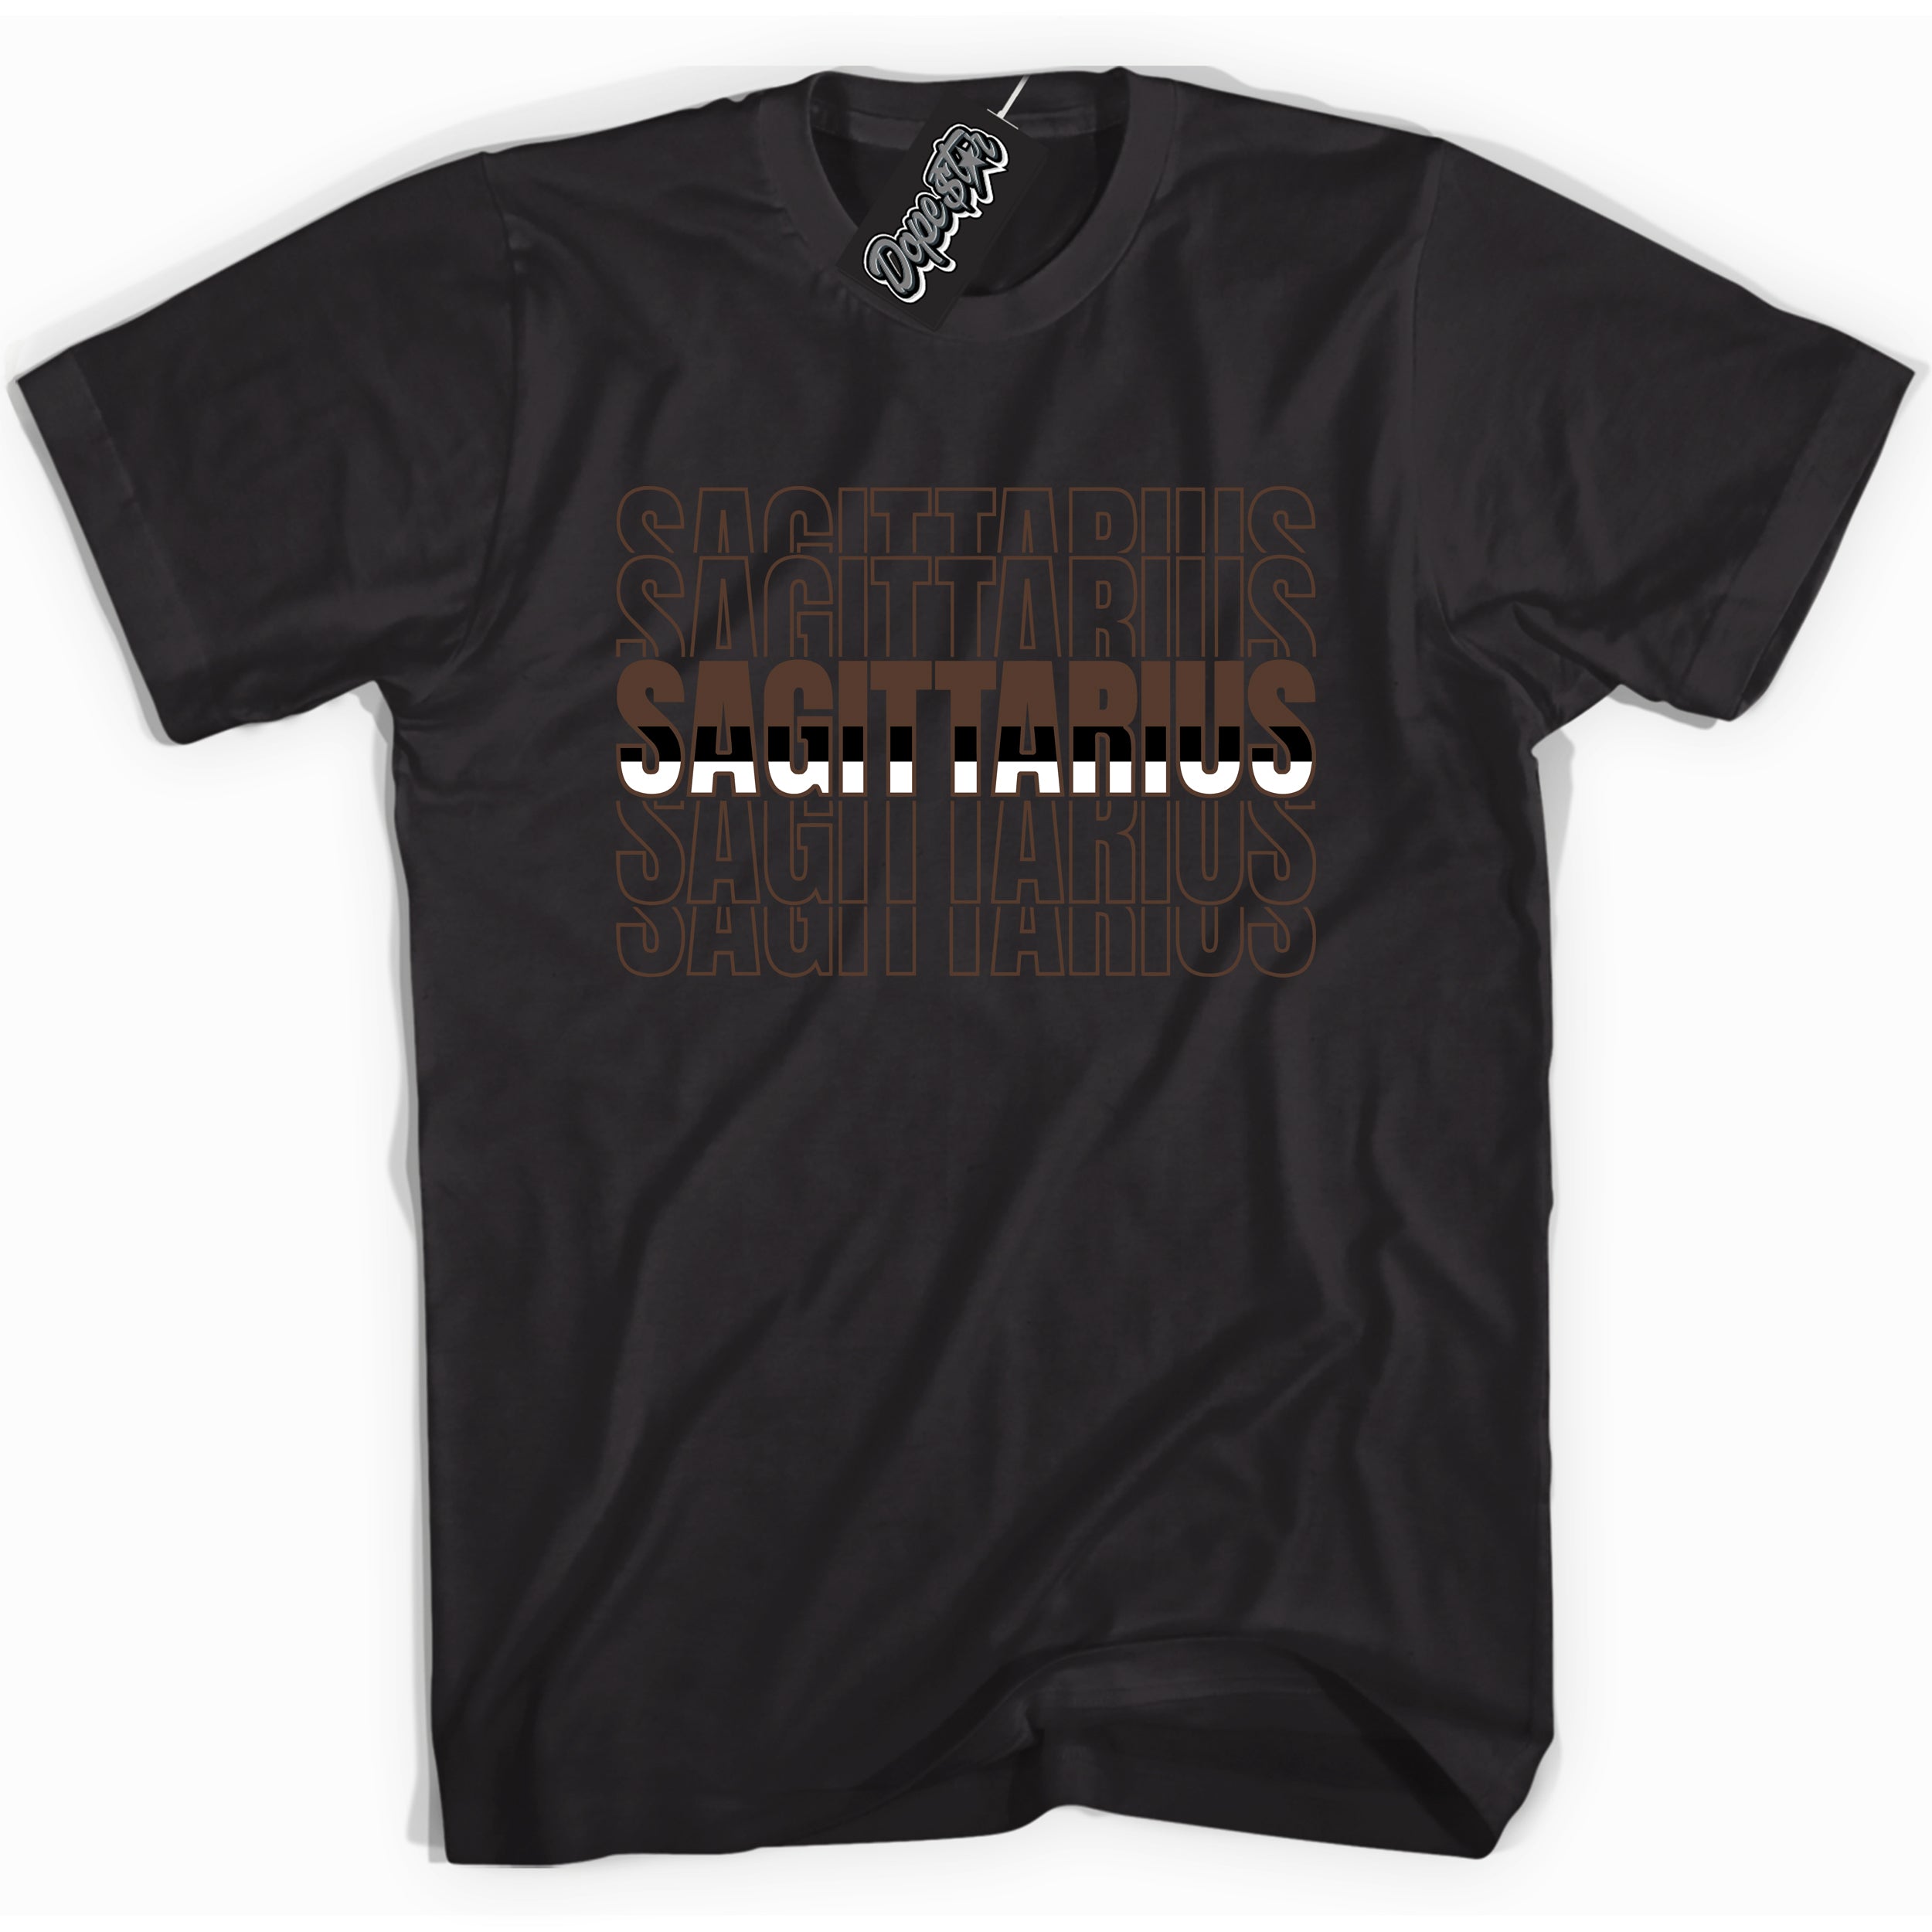 Cool Black graphic tee with “ Sagittarius ” design, that perfectly matches Palomino 1s sneakers 